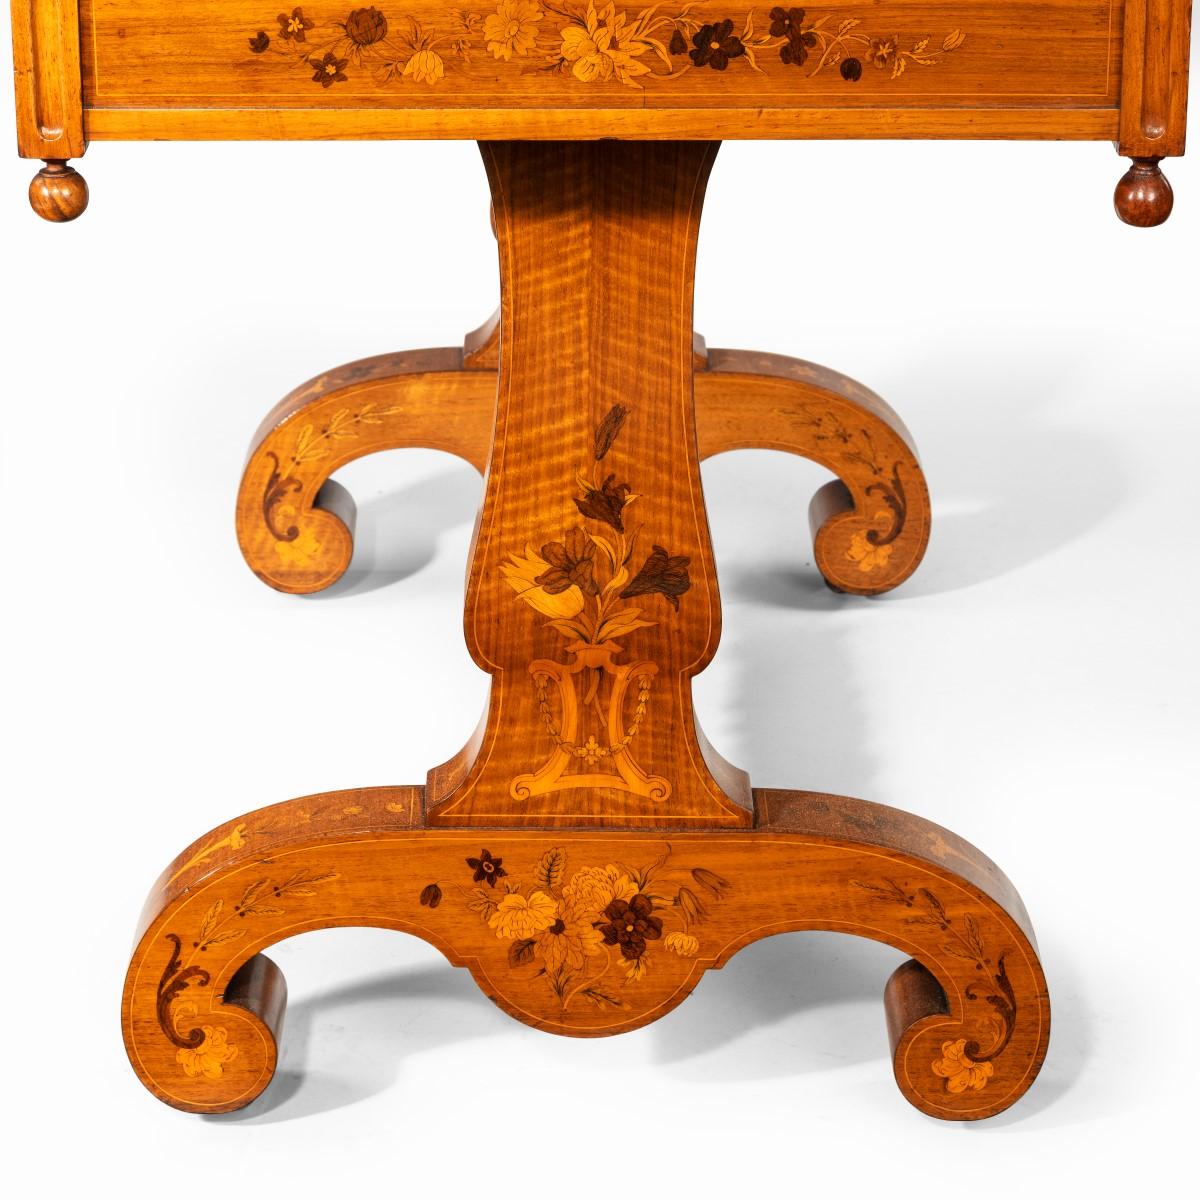 Victorian walnut marquetry writing table